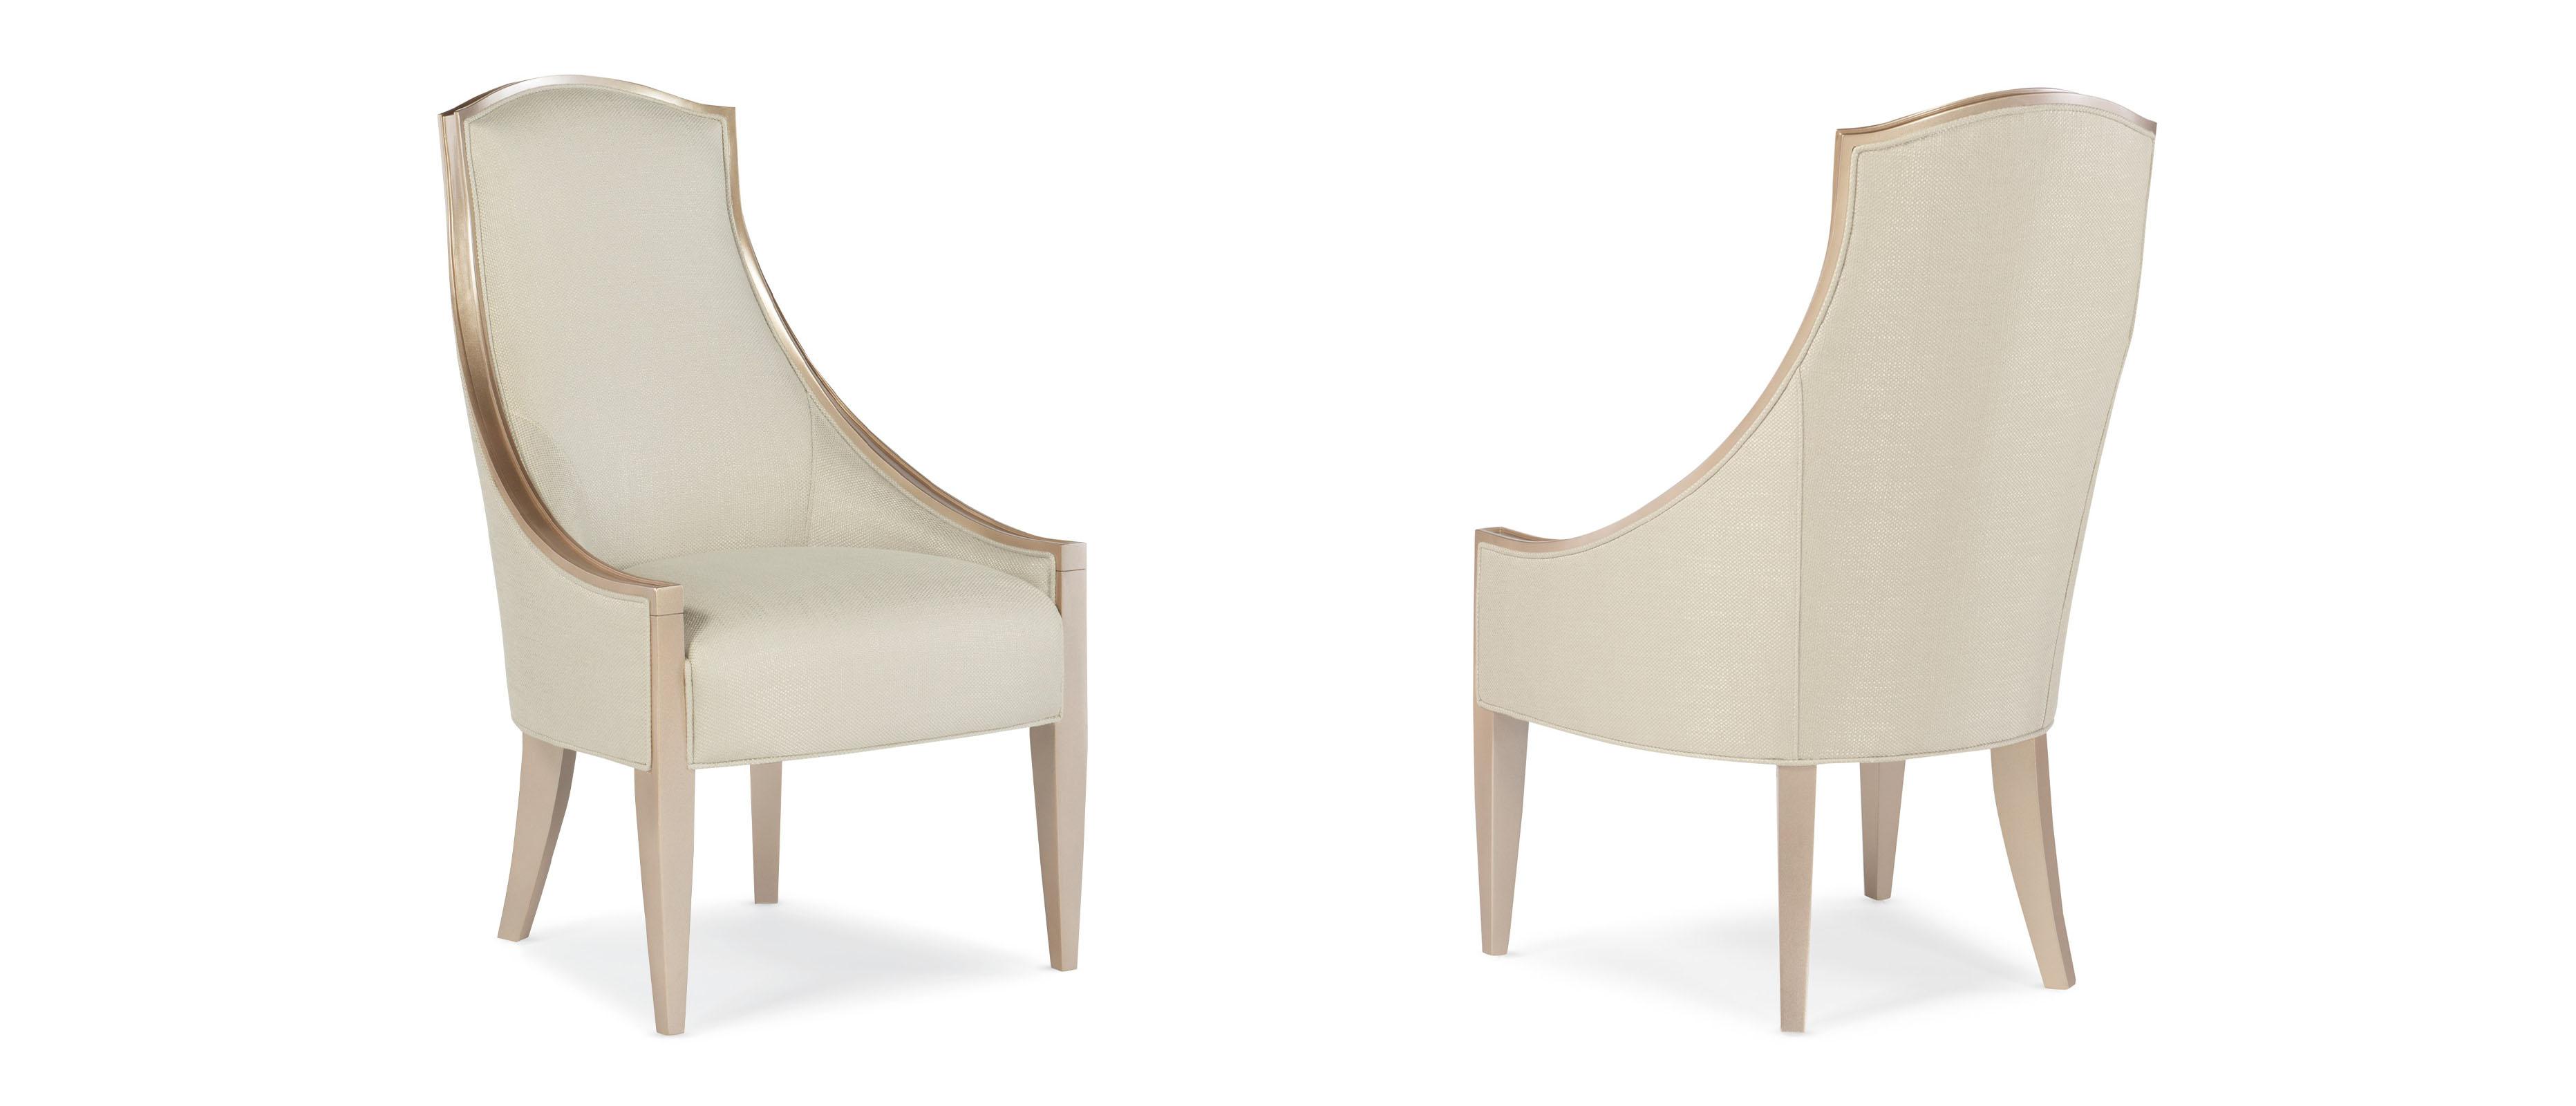 Contemporary Side Chair ADELA SIDE CHAIR C012-016-281-Set-2 in Off-White, Light Grey, Taupe Fabric